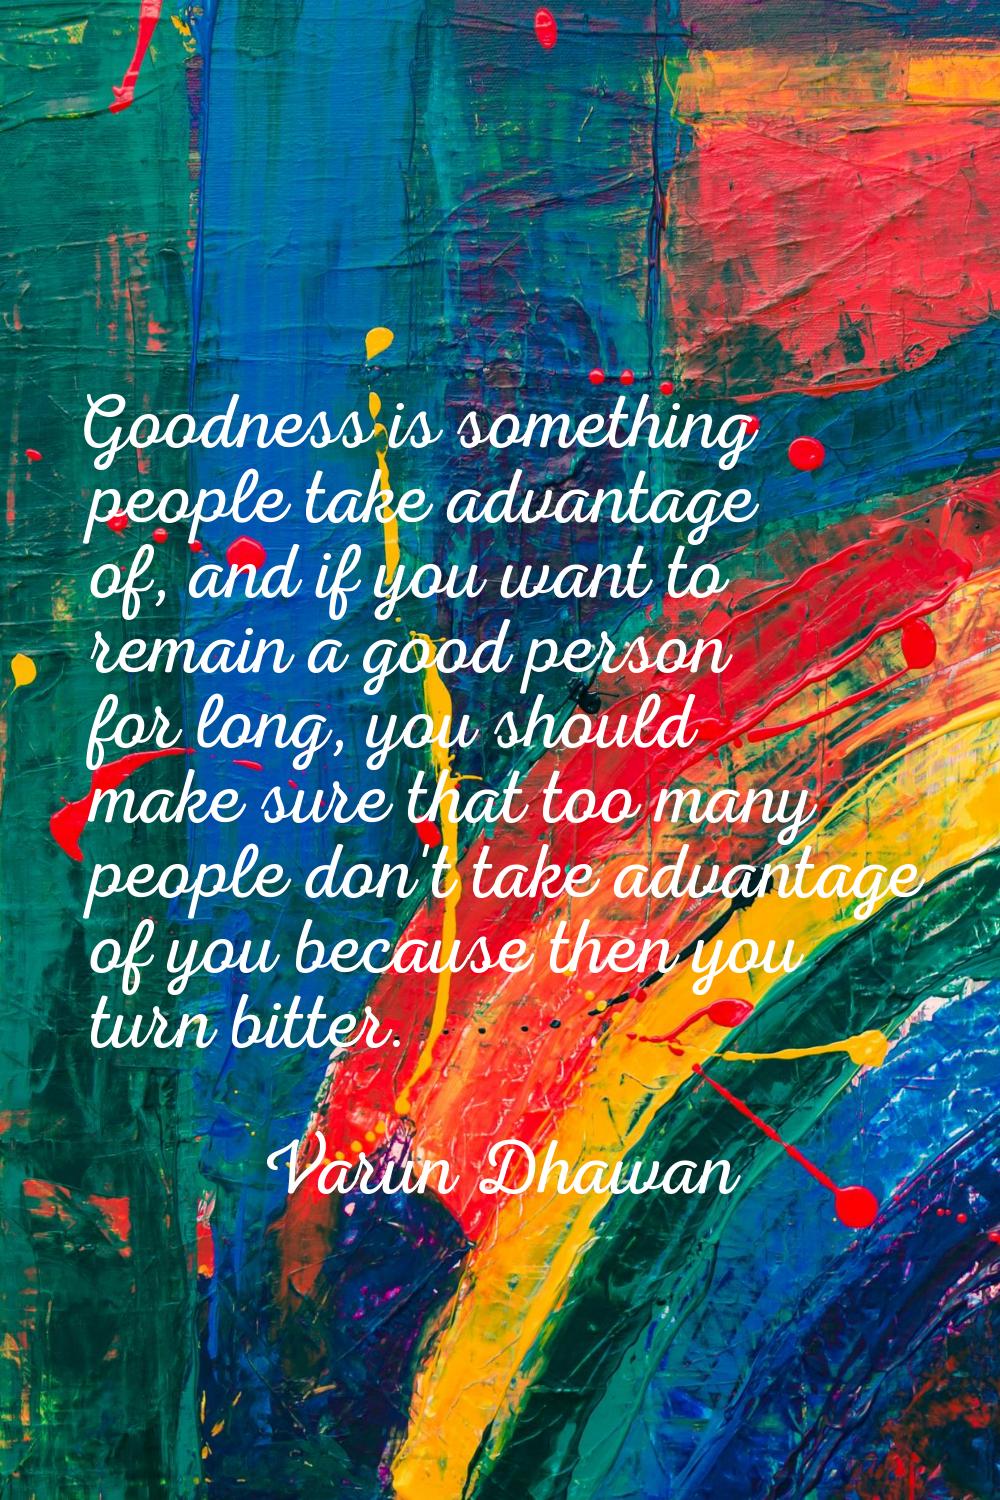 Goodness is something people take advantage of, and if you want to remain a good person for long, y